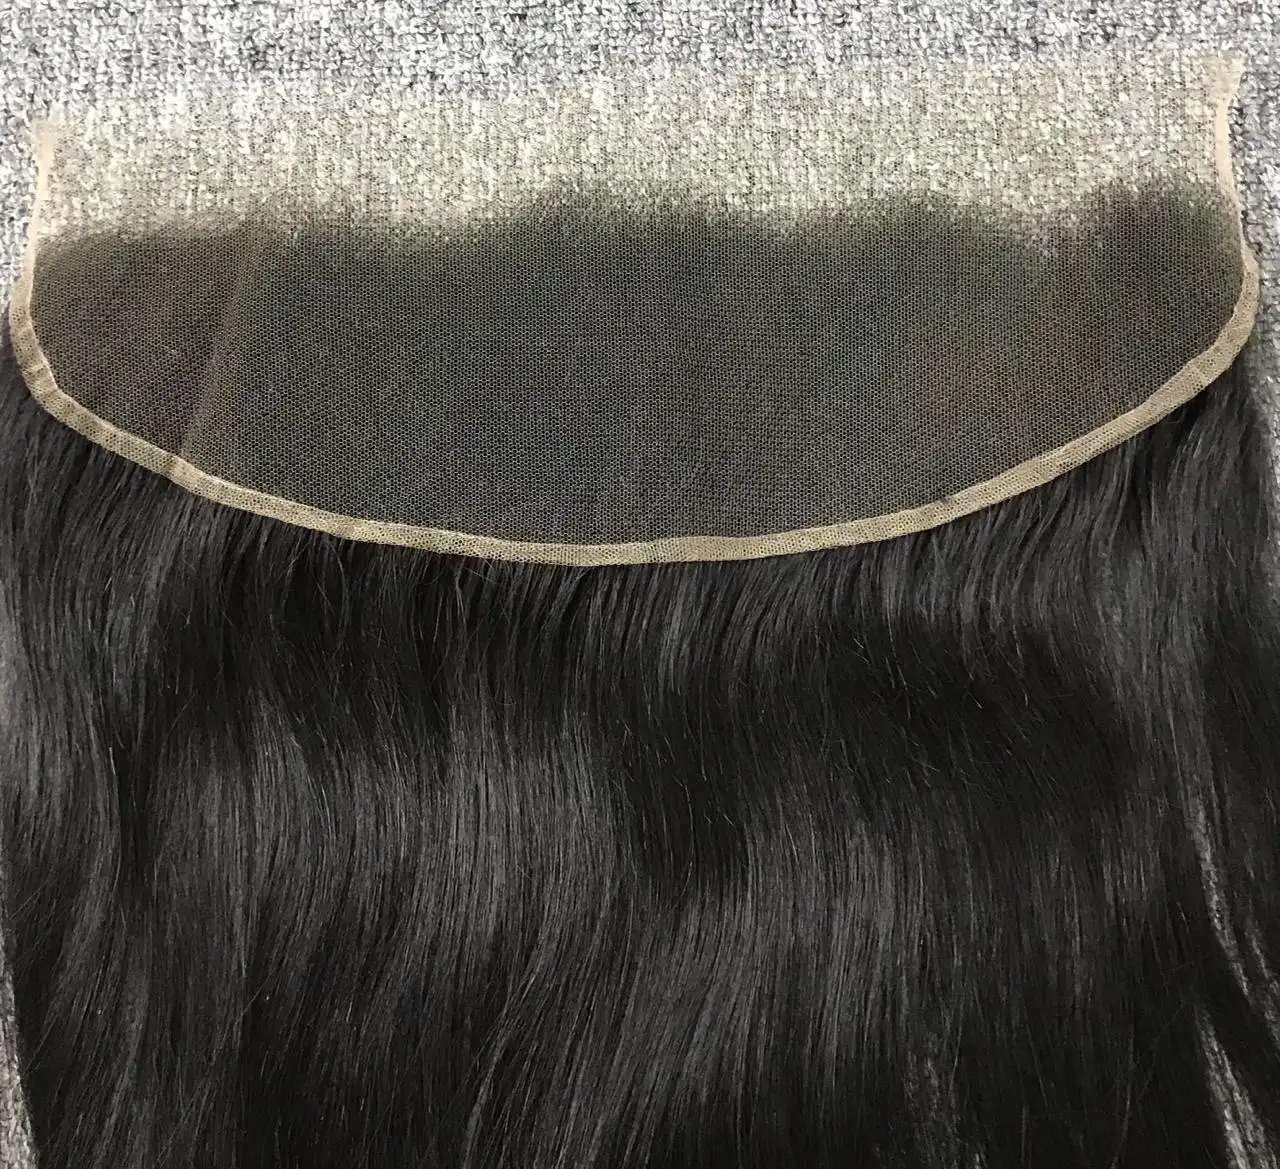 2024 Nieuwe Hd Lace Transparante Echte Human Hair Extensions Met Frontal Closure Fabrikant Nieuw Product